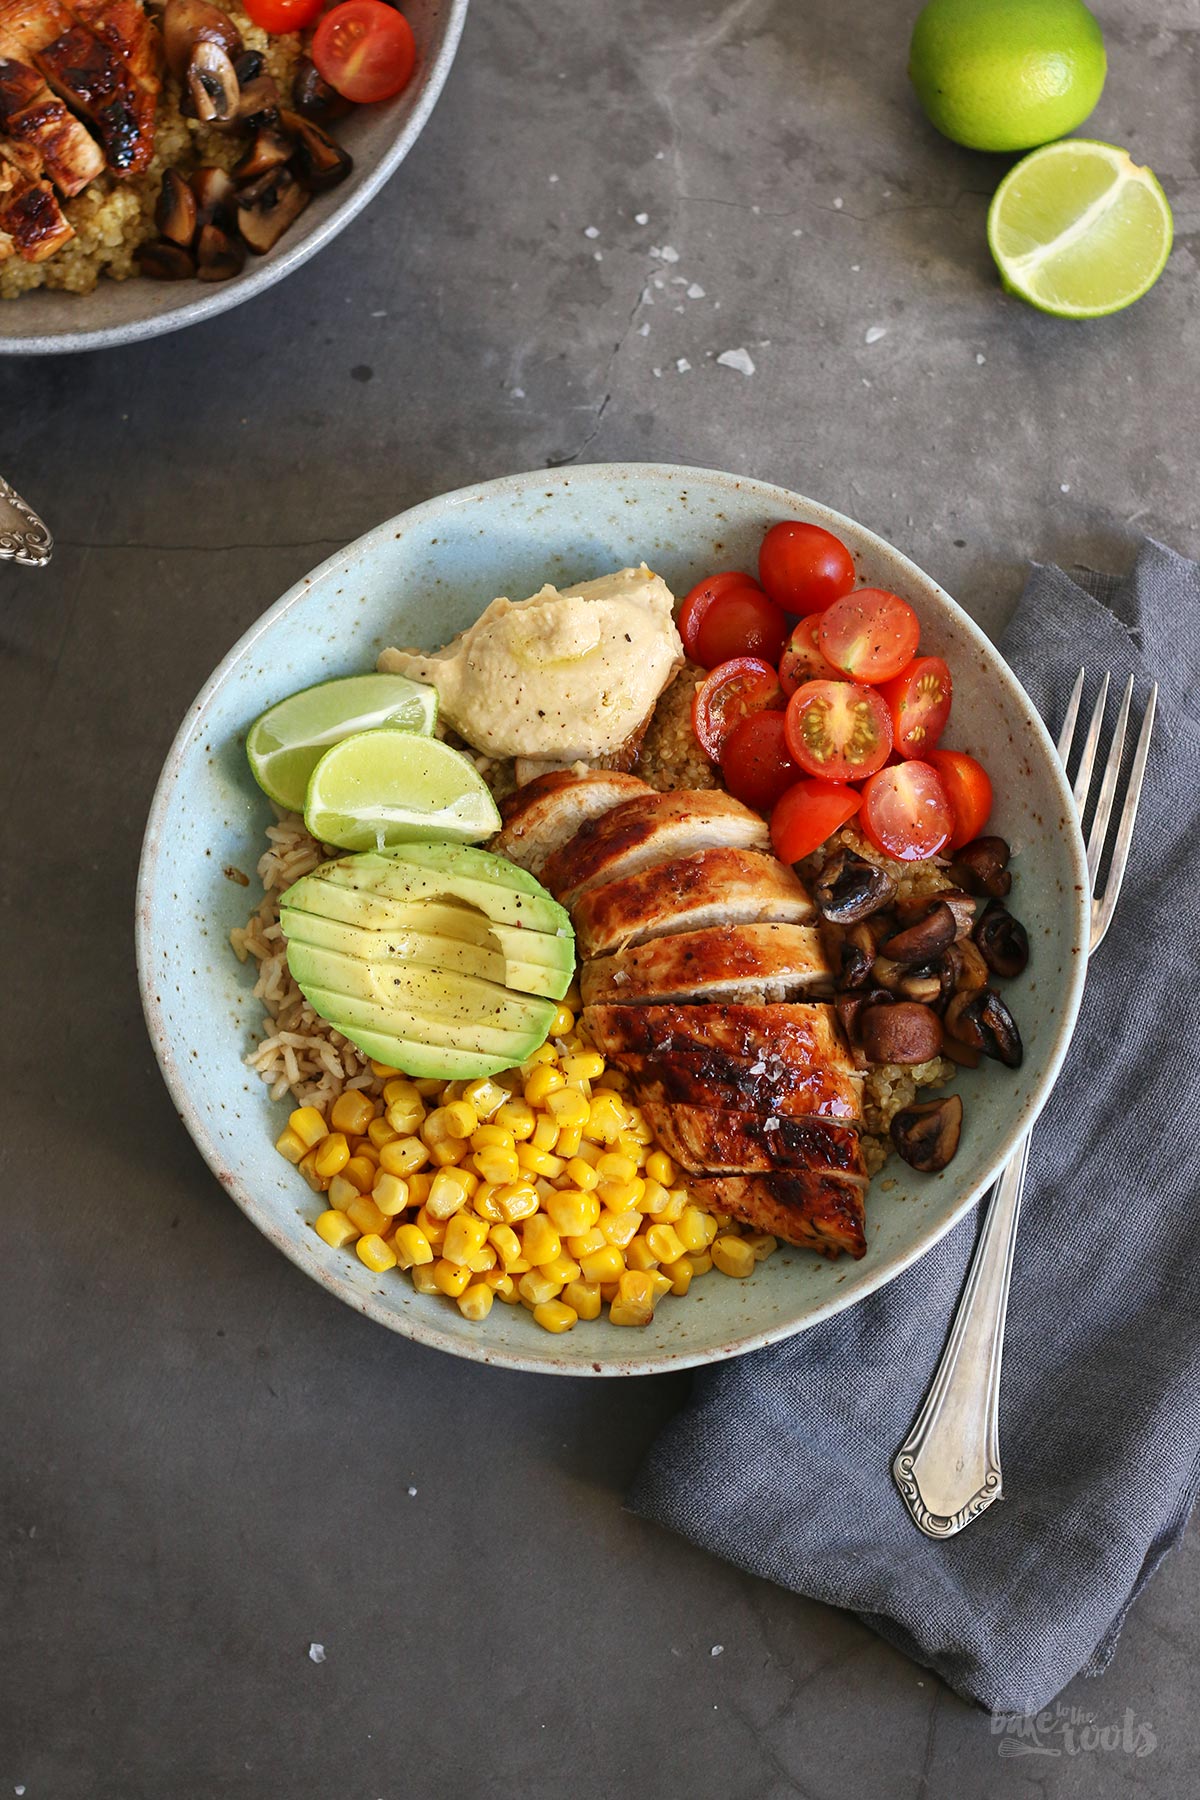 Quinoa Bowl with Chicken and Hummus | Bake to the roots